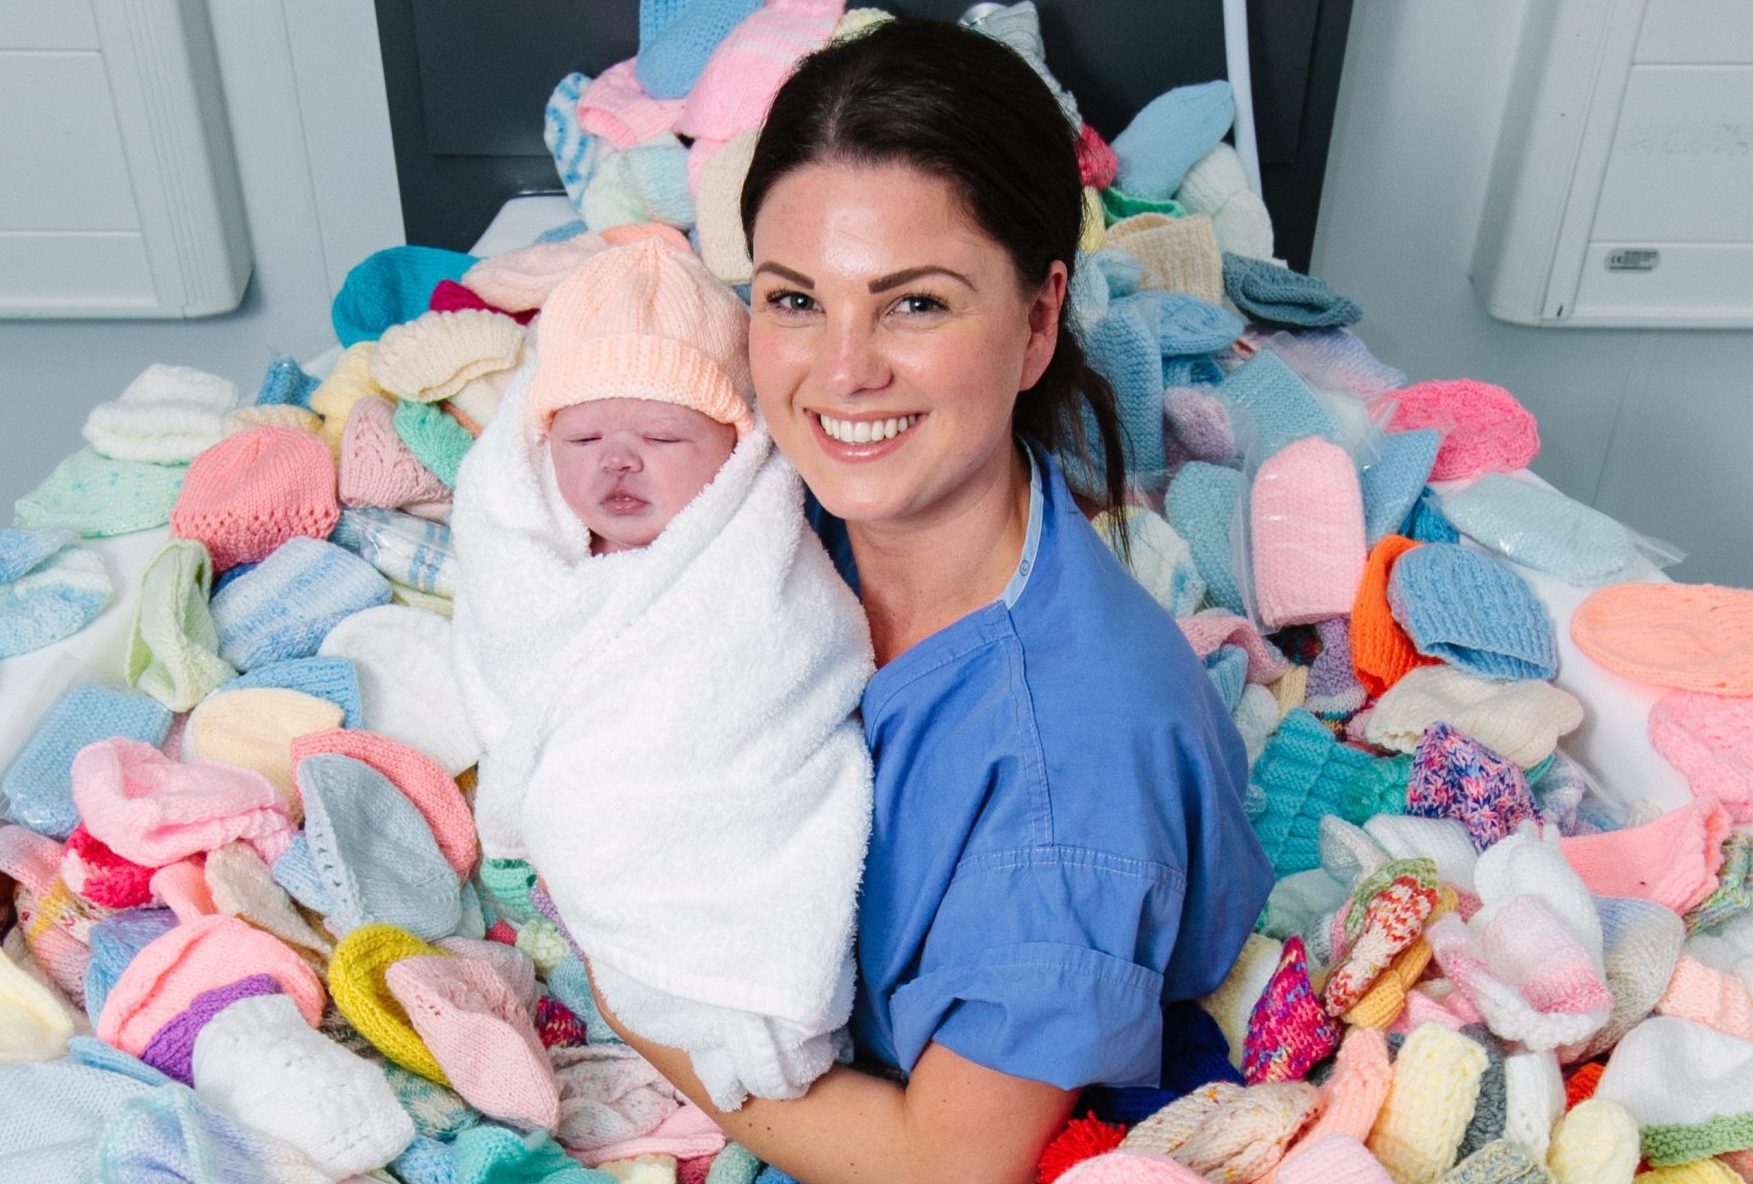 Midwife Lorna McGregor with newborn baby Aria Murray in birthing pool full of baby hats at the Queen Elizabeth University Hospital in Glasgow